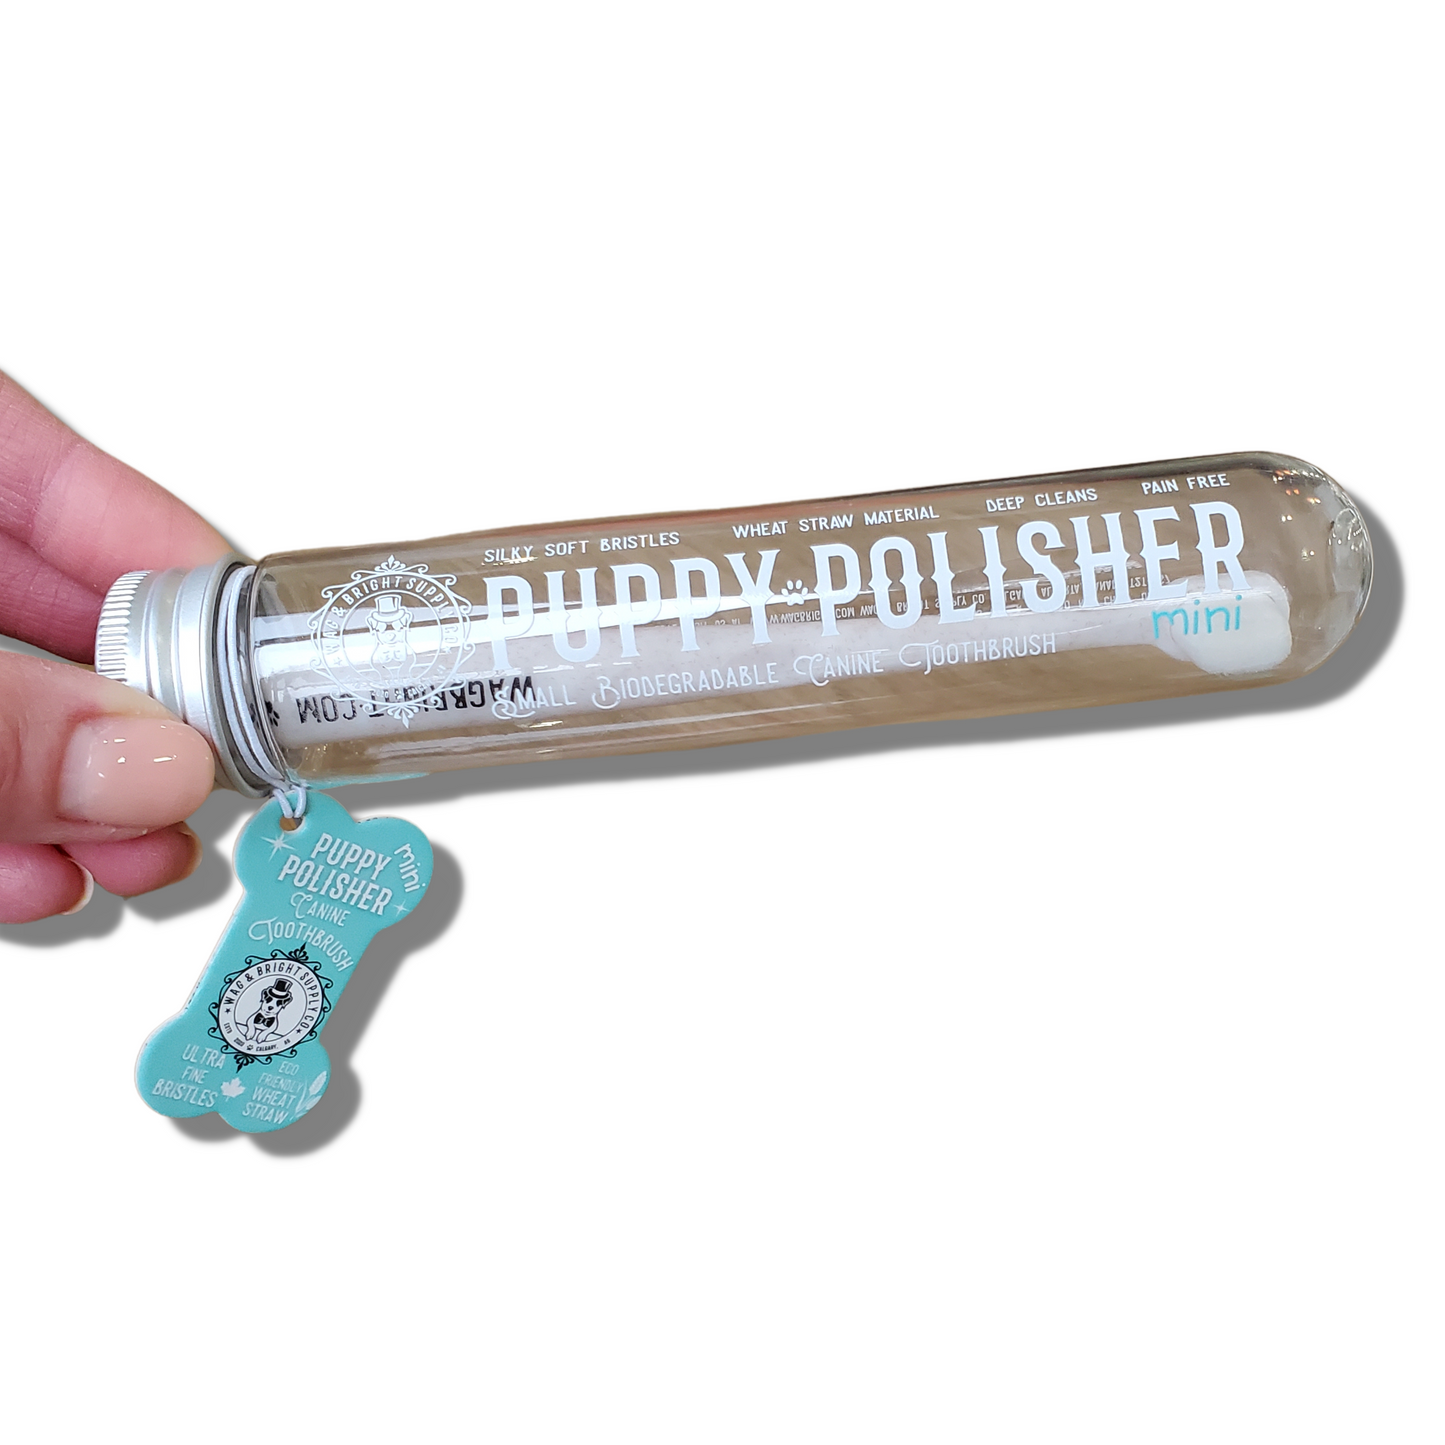 Wag & Bright Puppy Polisher Toothbrush Mini Nano for dogs